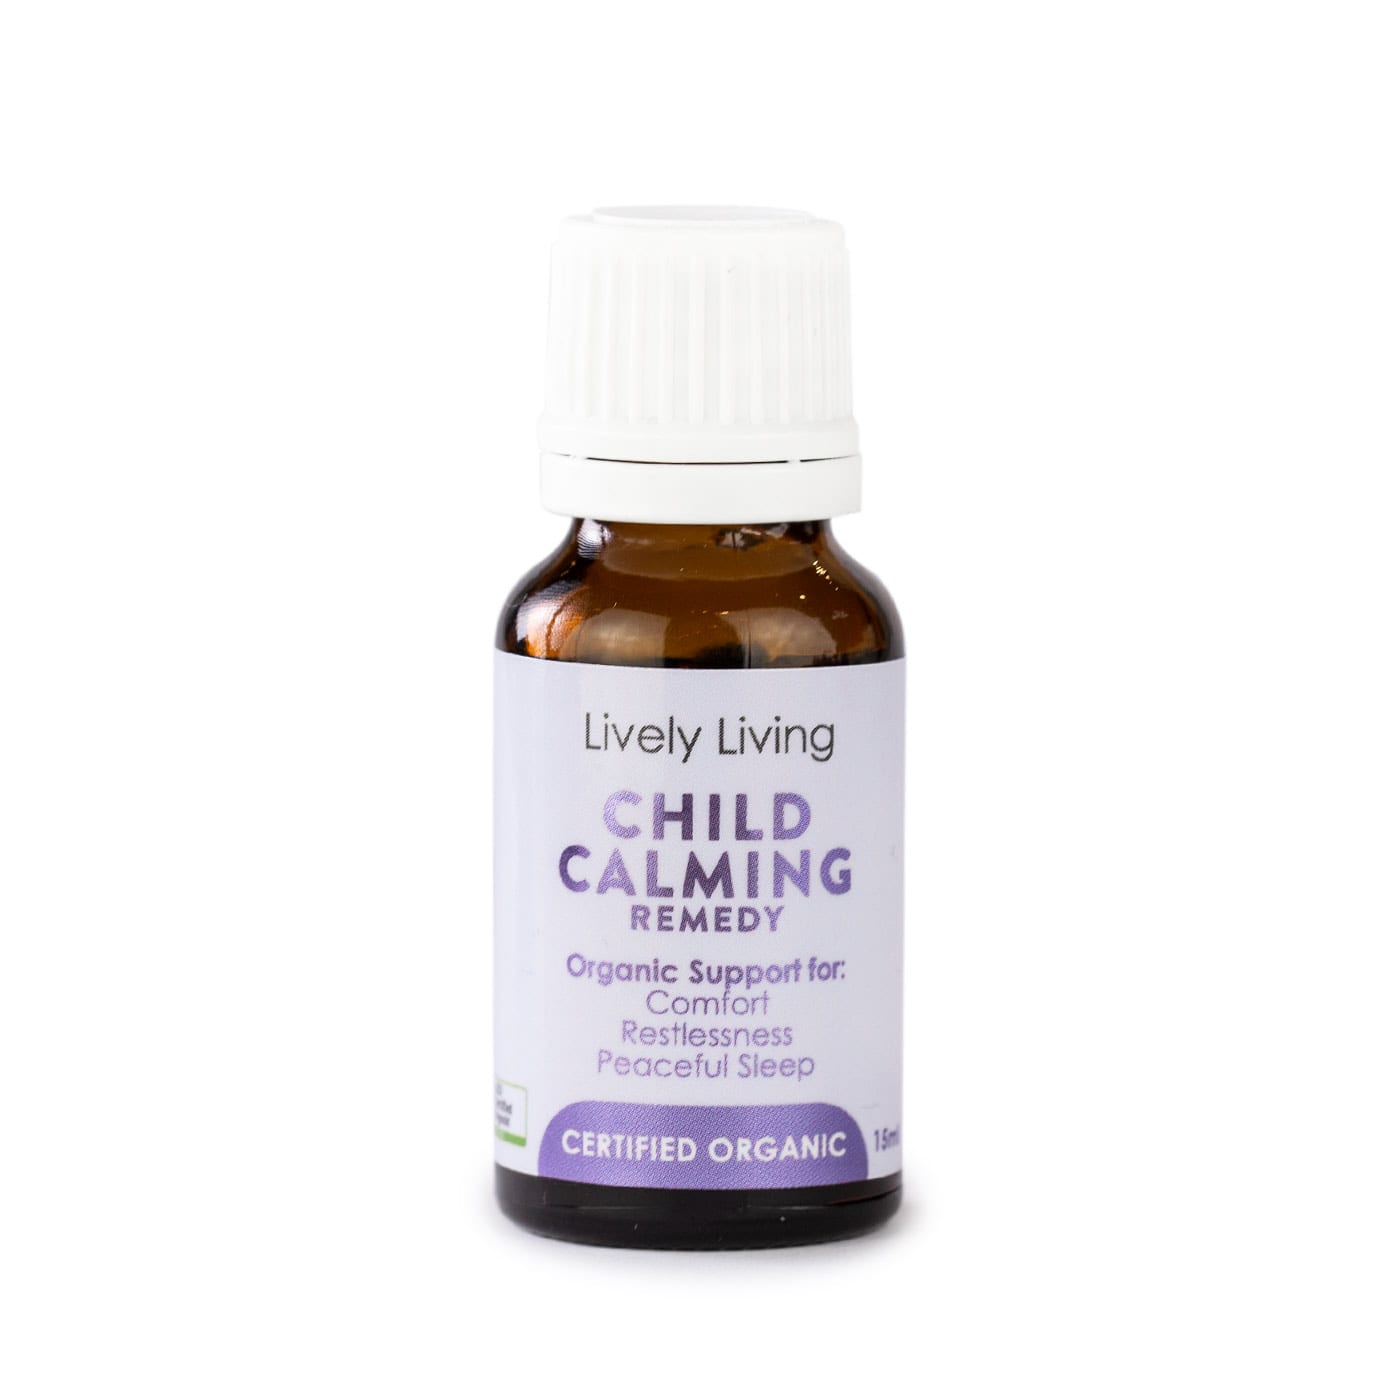 Lively Living Child Calm Remedy - 100% Certified Organic Essential Oil 15ml